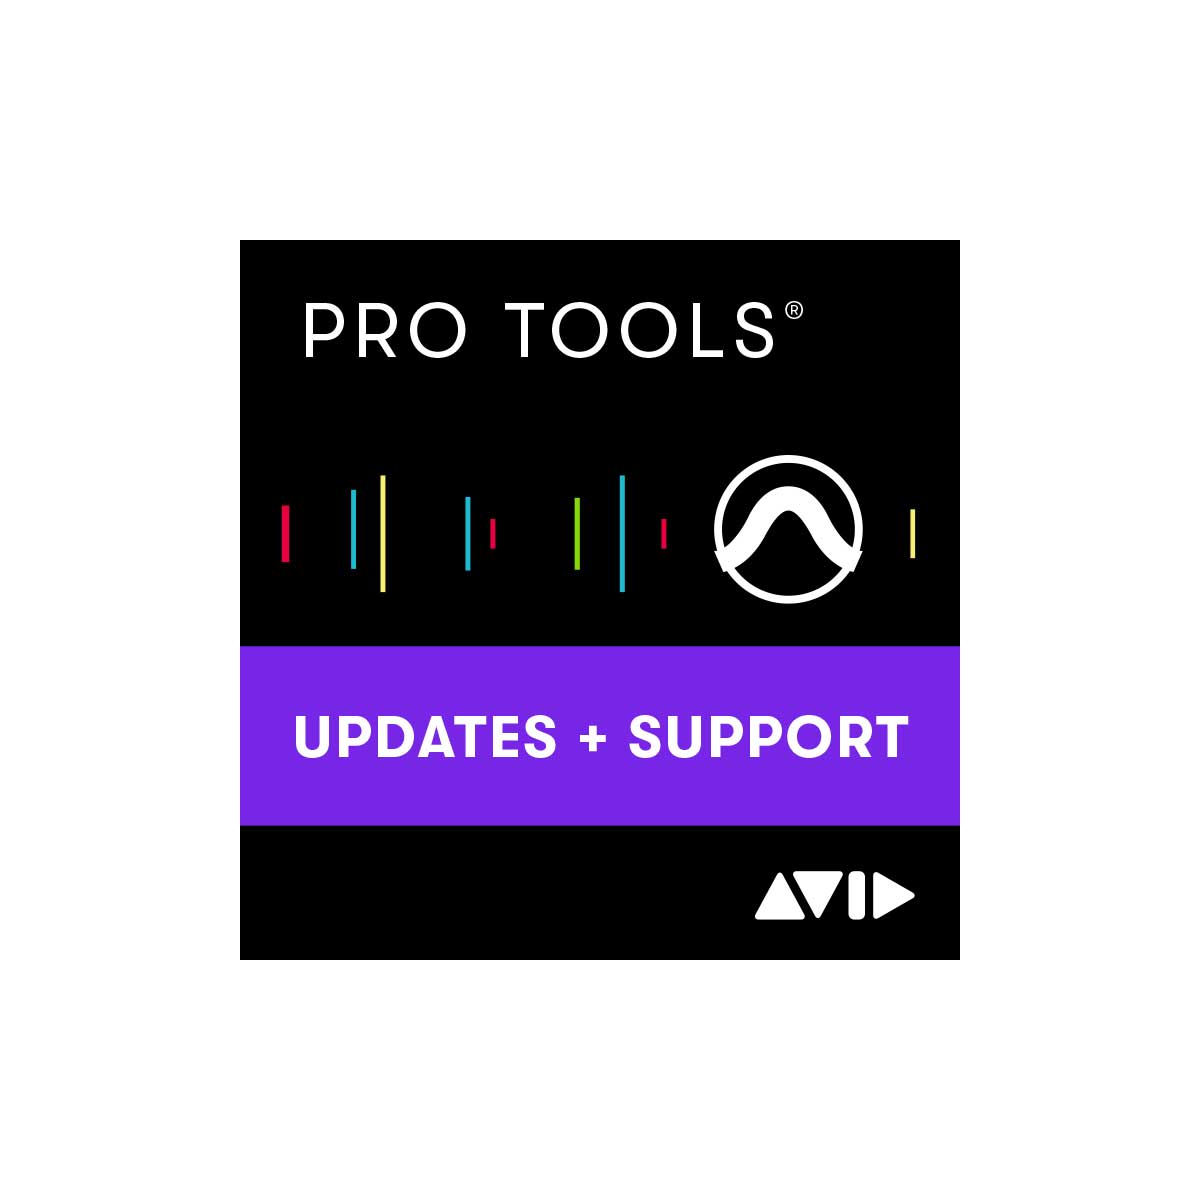 AVID Pro Tools 1-Year Upgrade with Software Updates + Support Plan